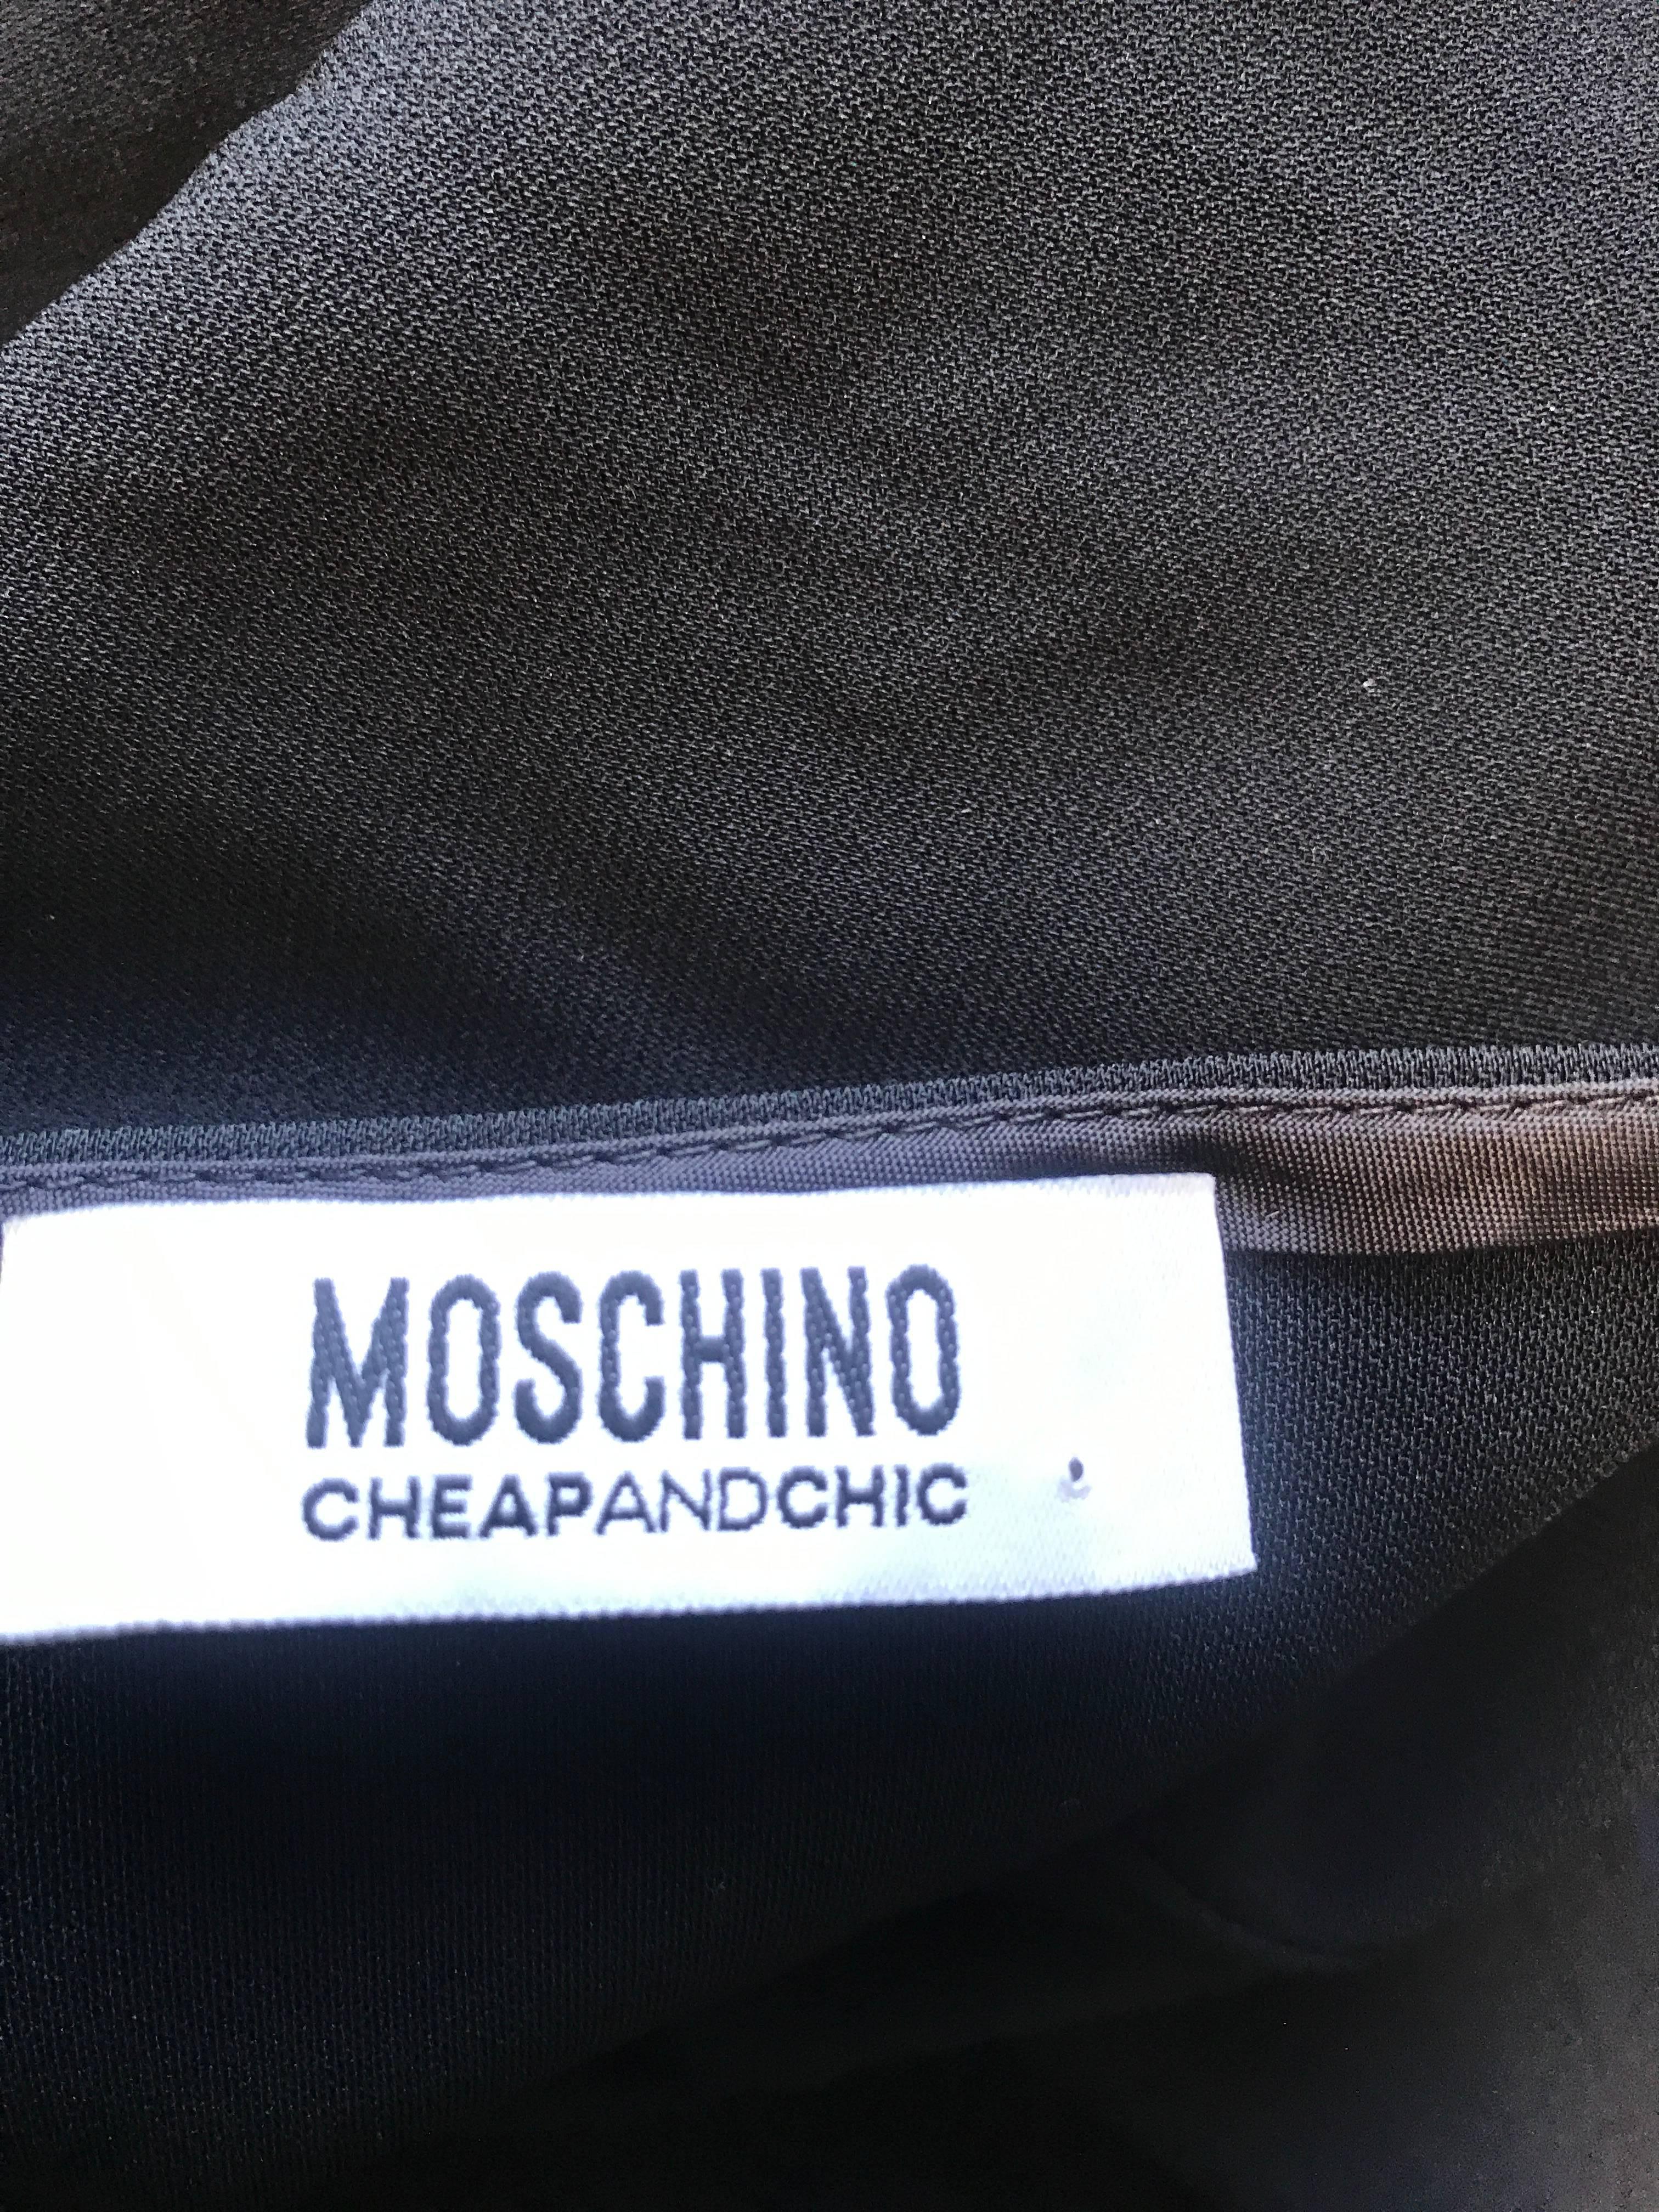 1990s Moschino Cheap & Chic Black Silver Chain Loop Belt Vintage Dress Size 6  For Sale 3